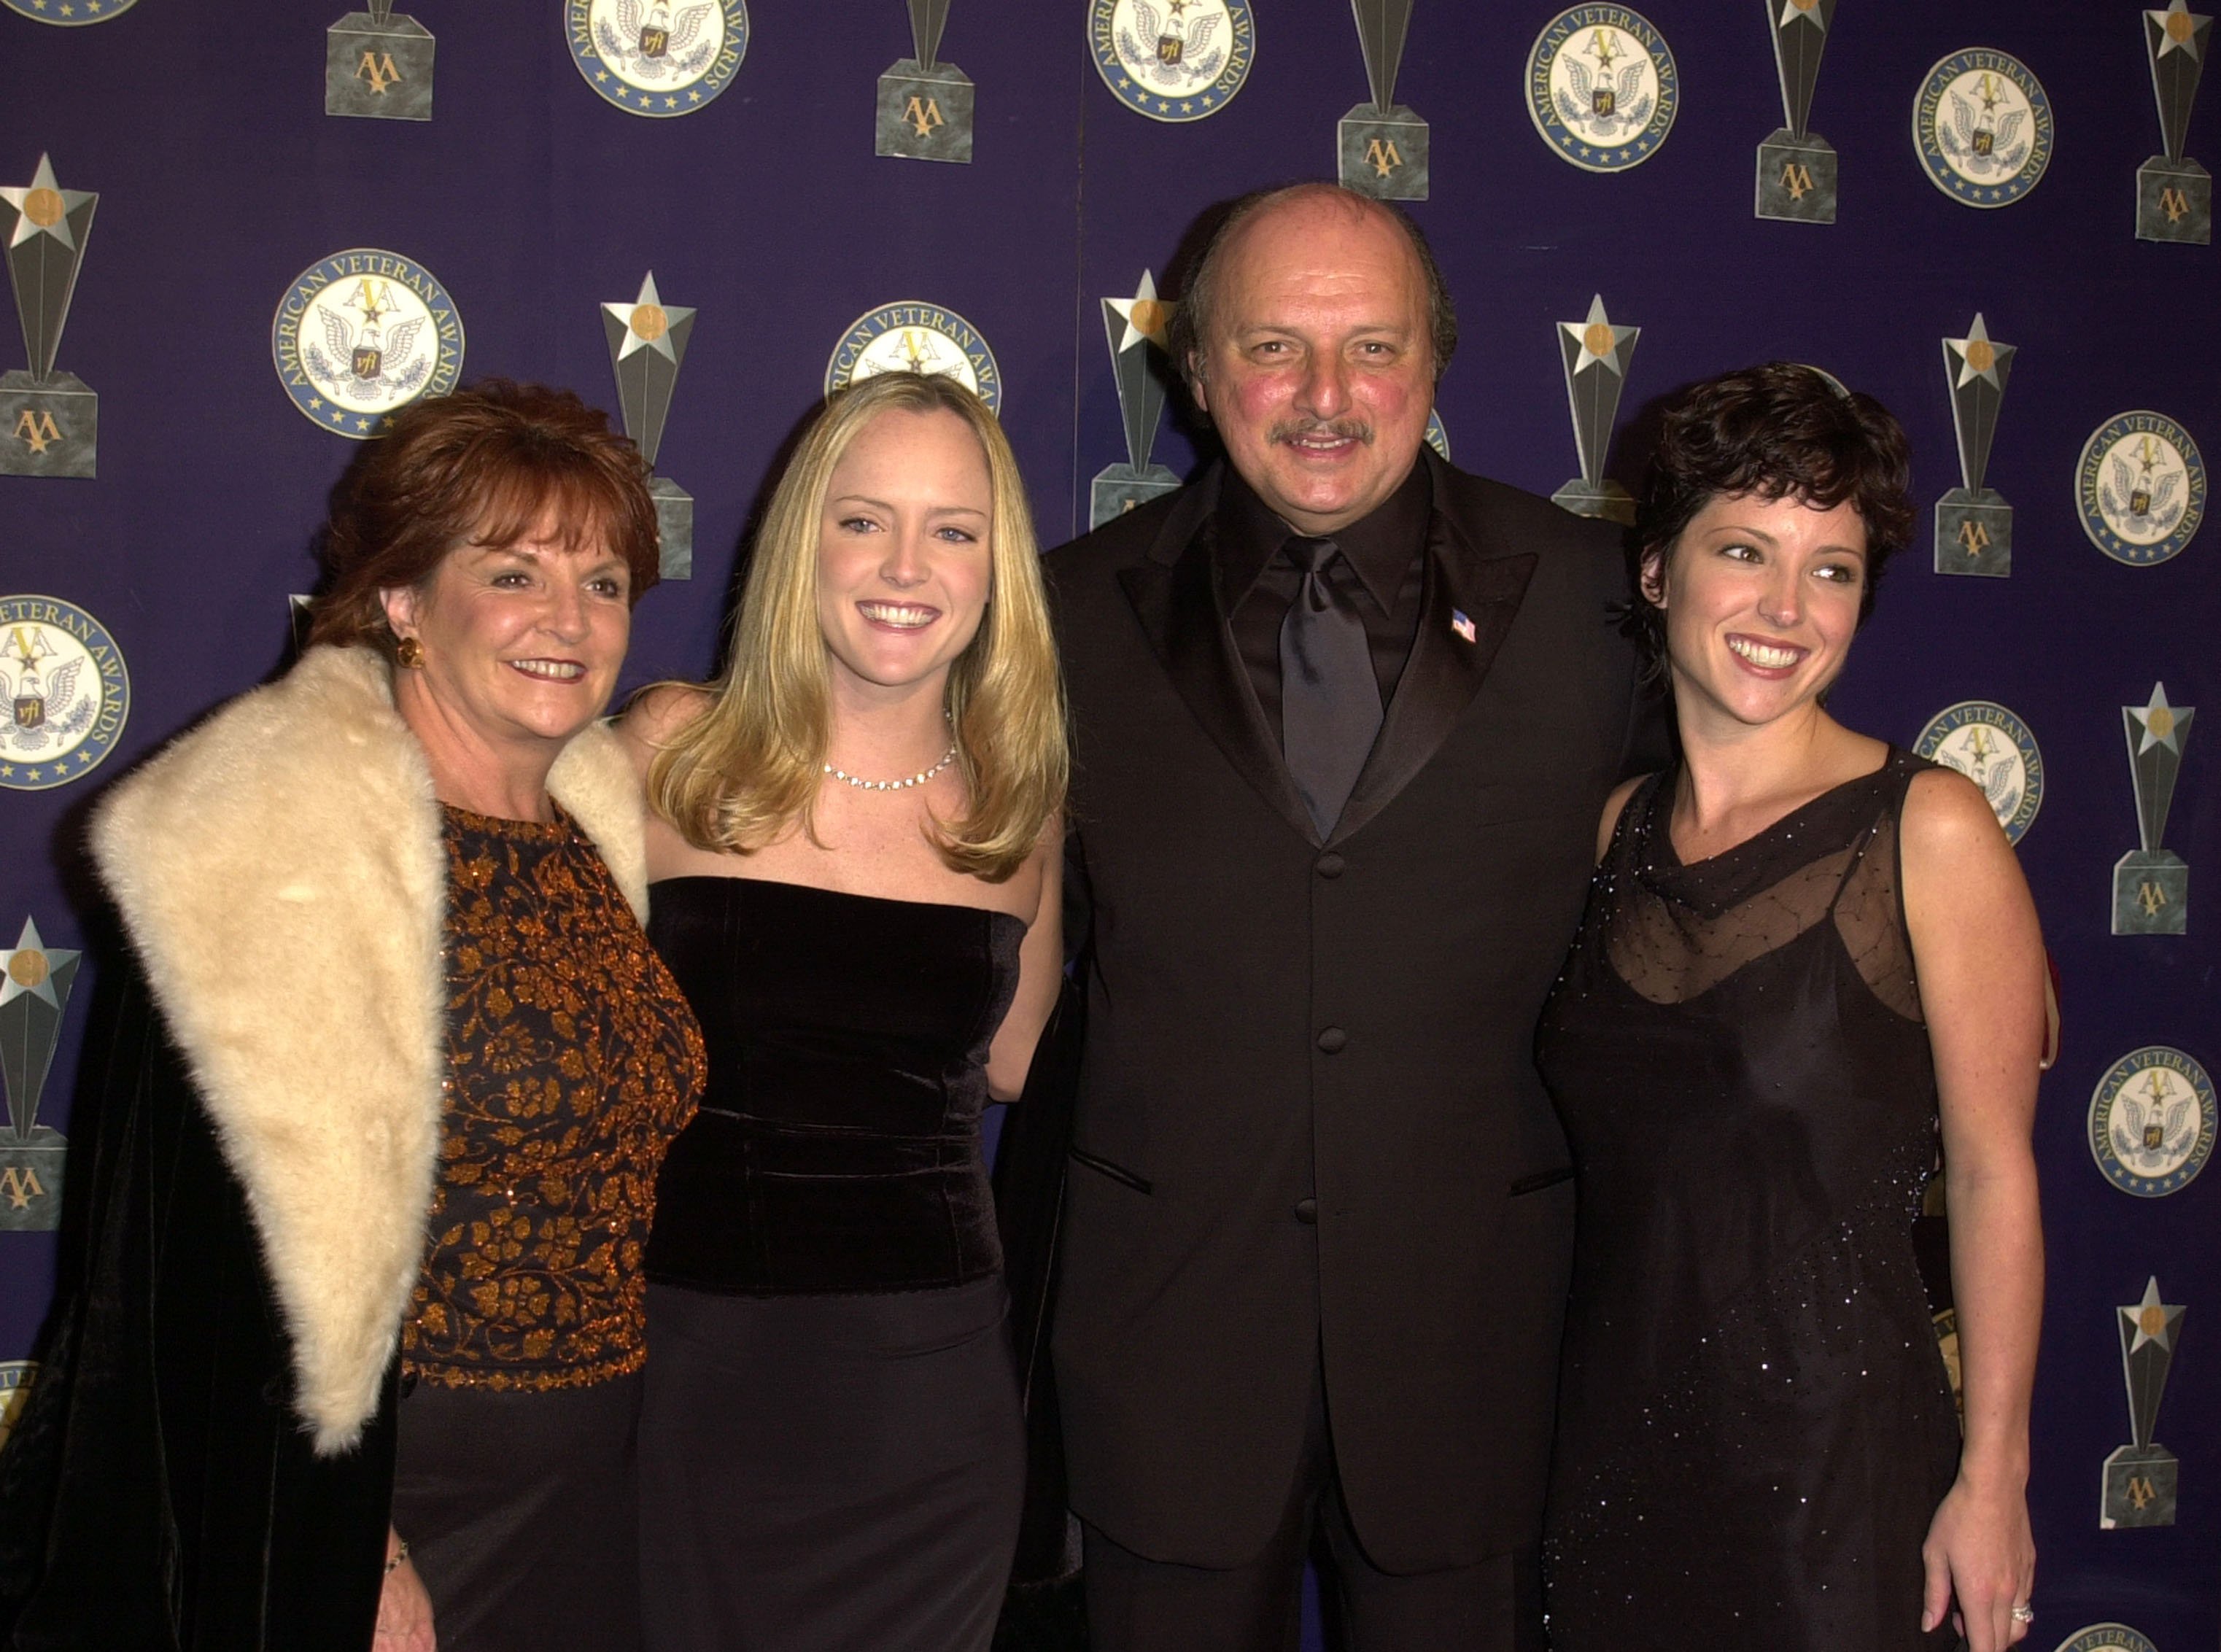 Dennis Franz, wife Joanie, daughters Krista and Trisha attending the 7th American Veteran Awards. / Source: Getty Images